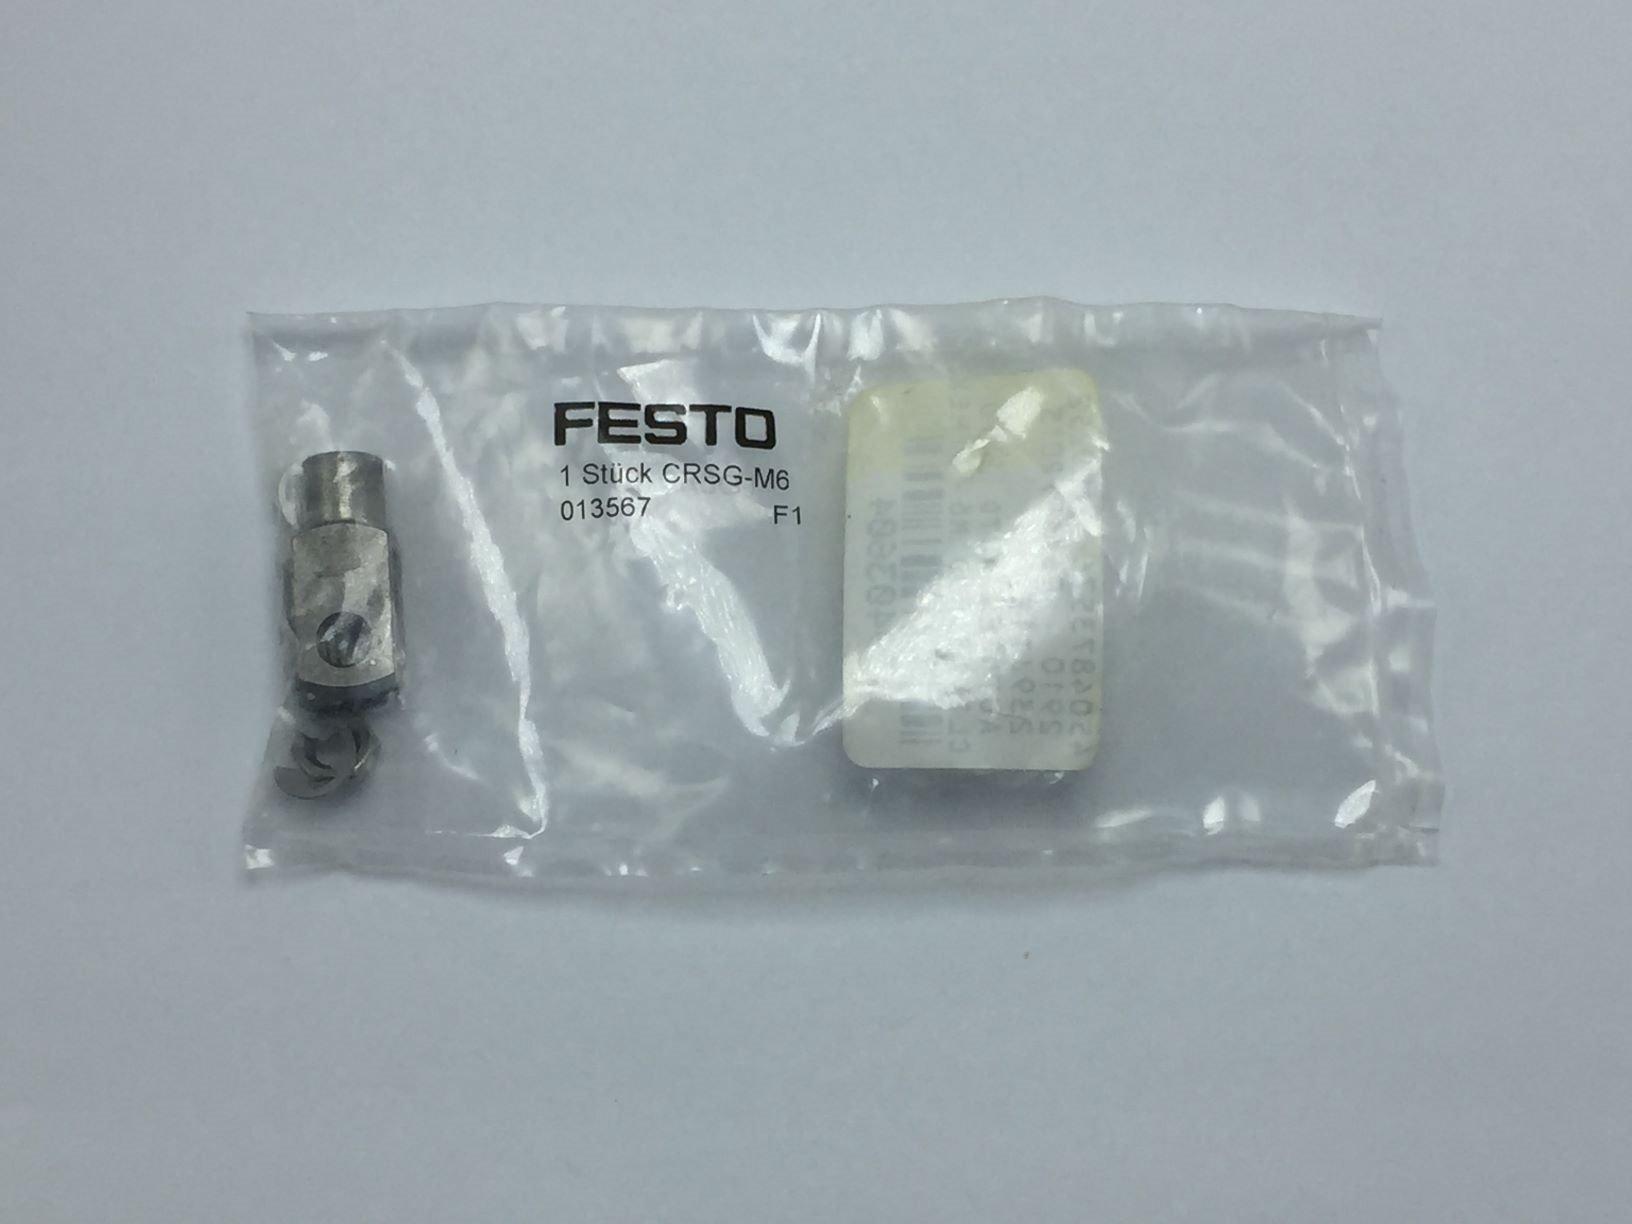 NEW FESTO CRSG-M6 BEARING ROD CLEVIS SIZE M6  FACTORY SEALED 